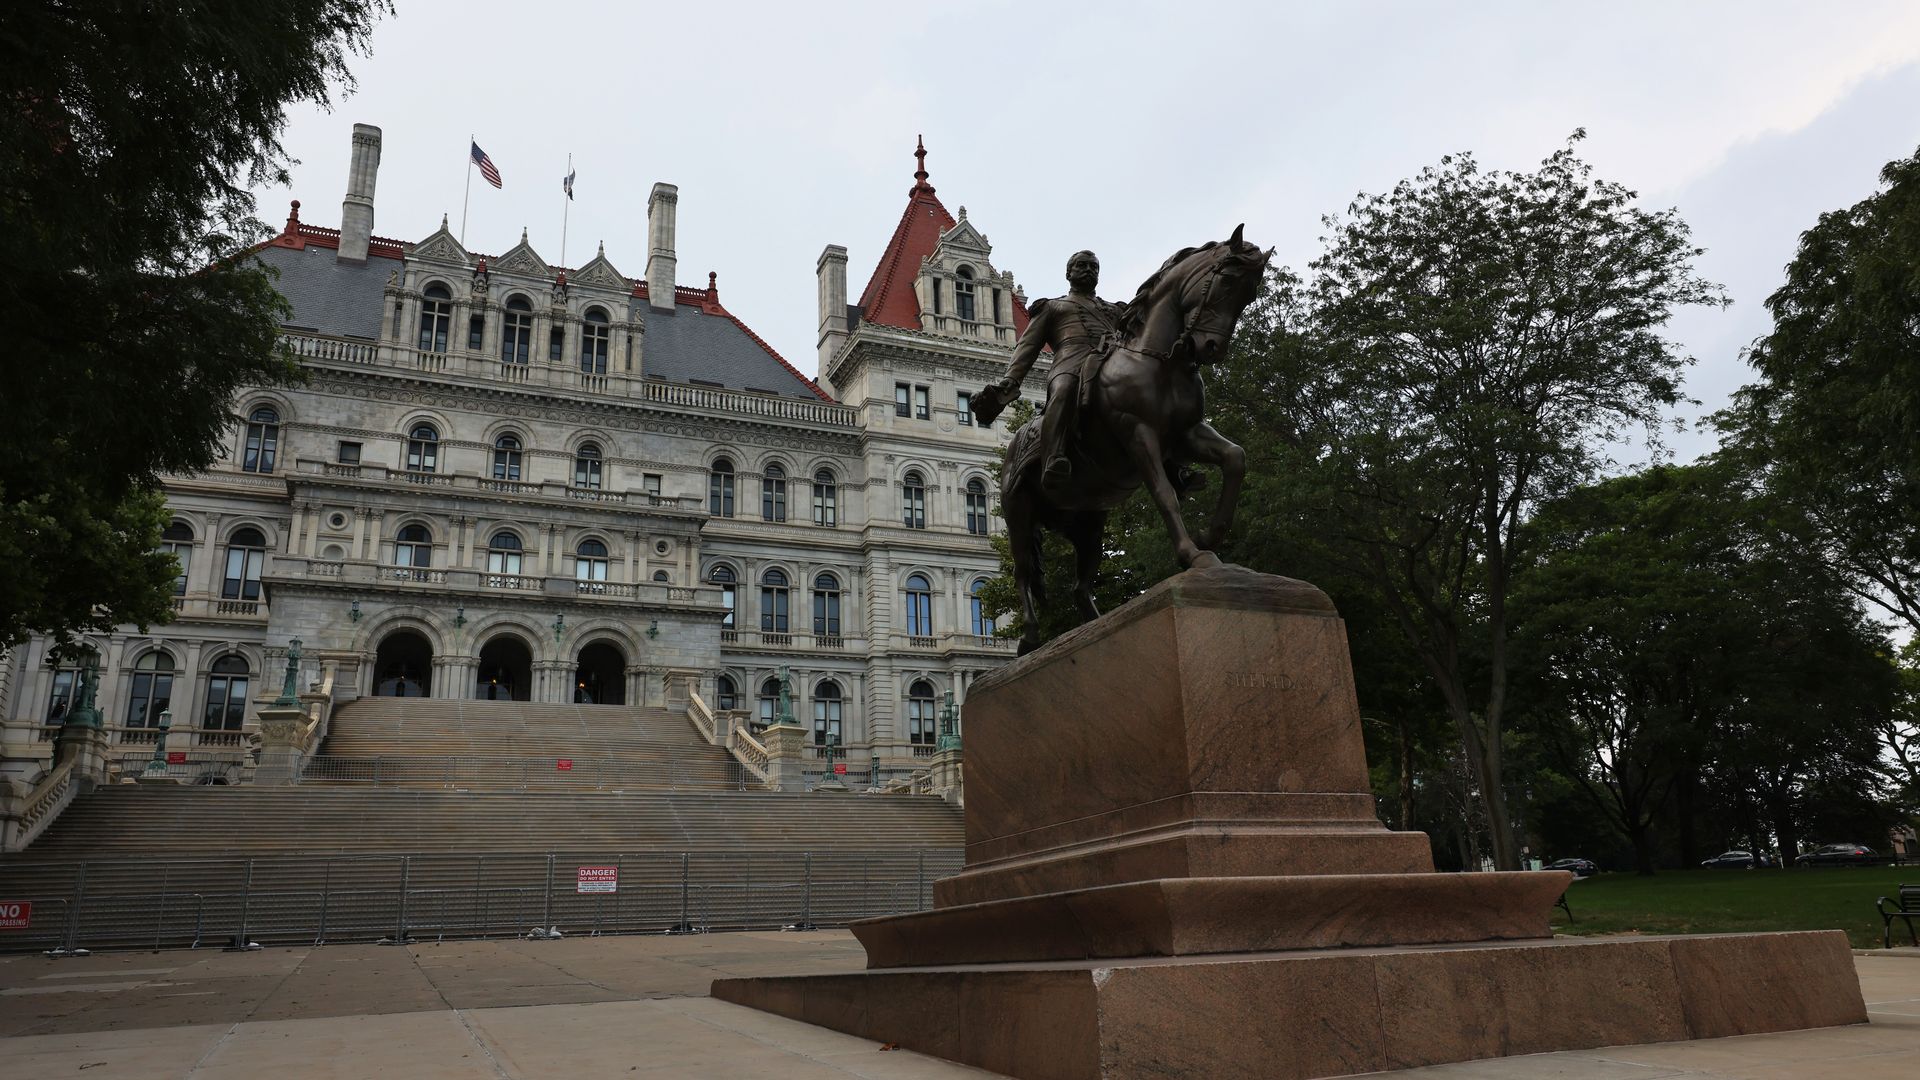 Photo of a statue of a person riding a horse positioned in front of the New York state capitol